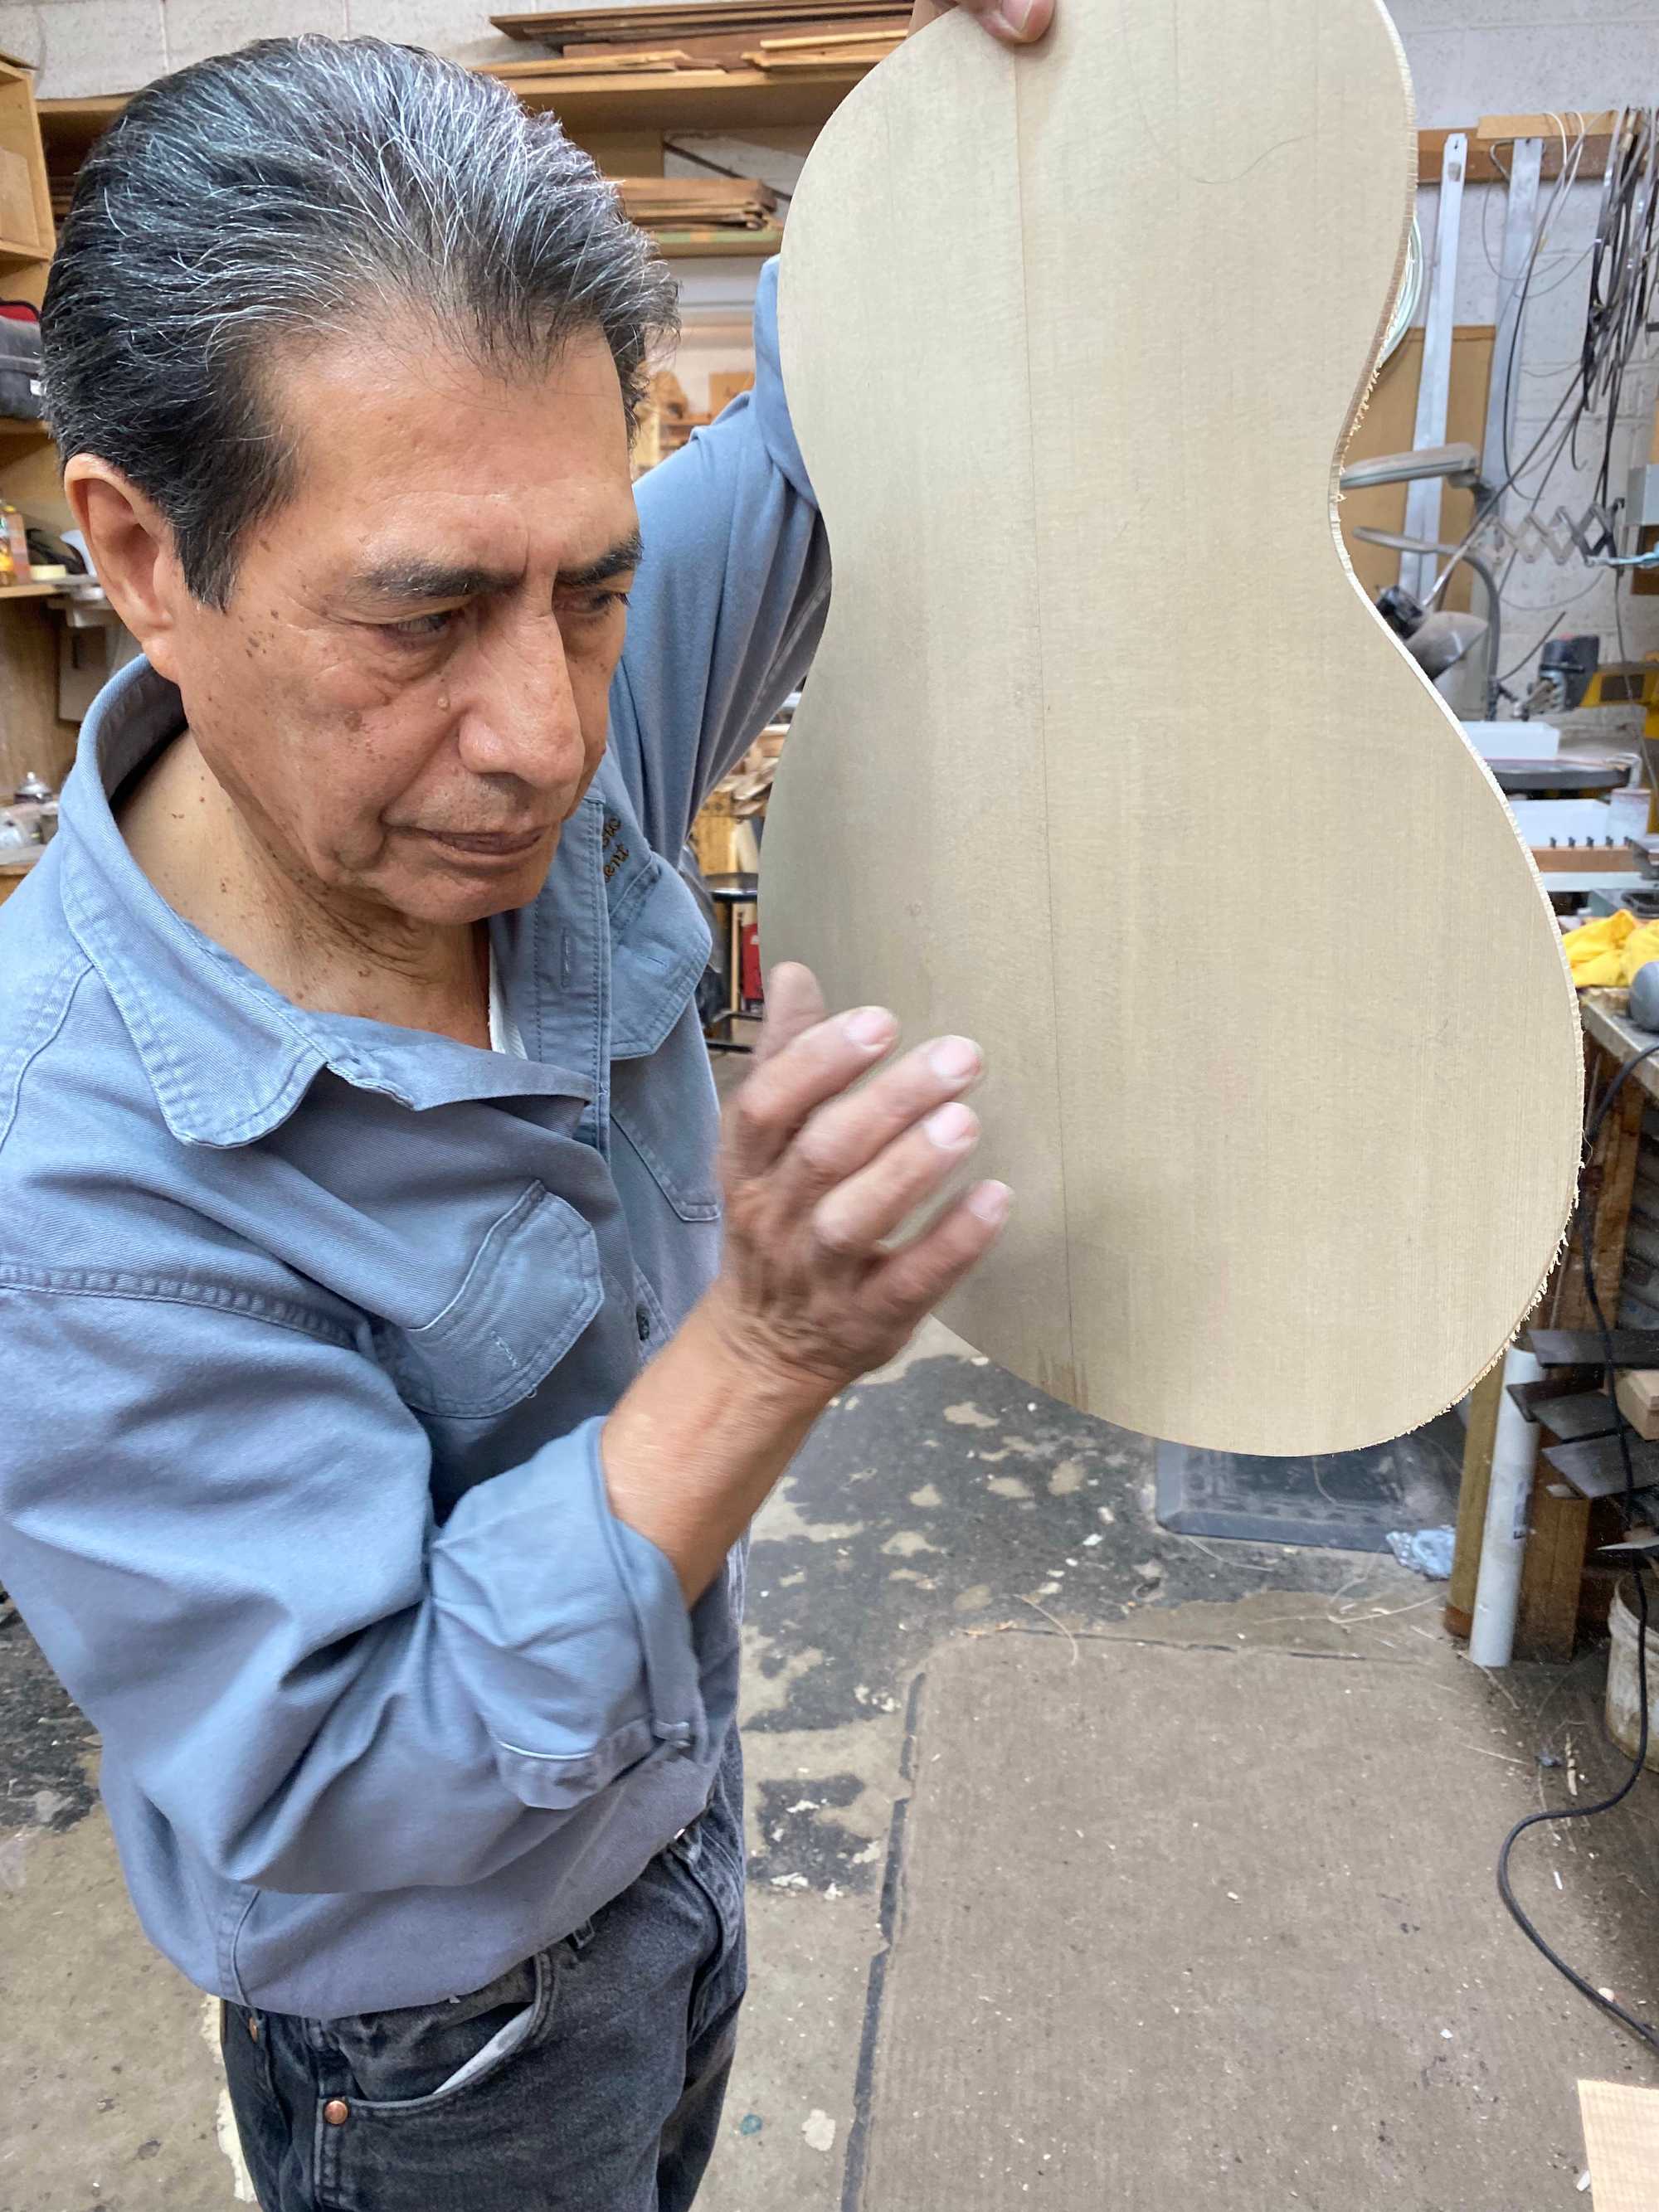  Rick Pimentel, president of Pimentel & Sons Guitarmakers, can tell how good a guitar will sound when it's completed by tapping on the wood throughout the process of making it. 